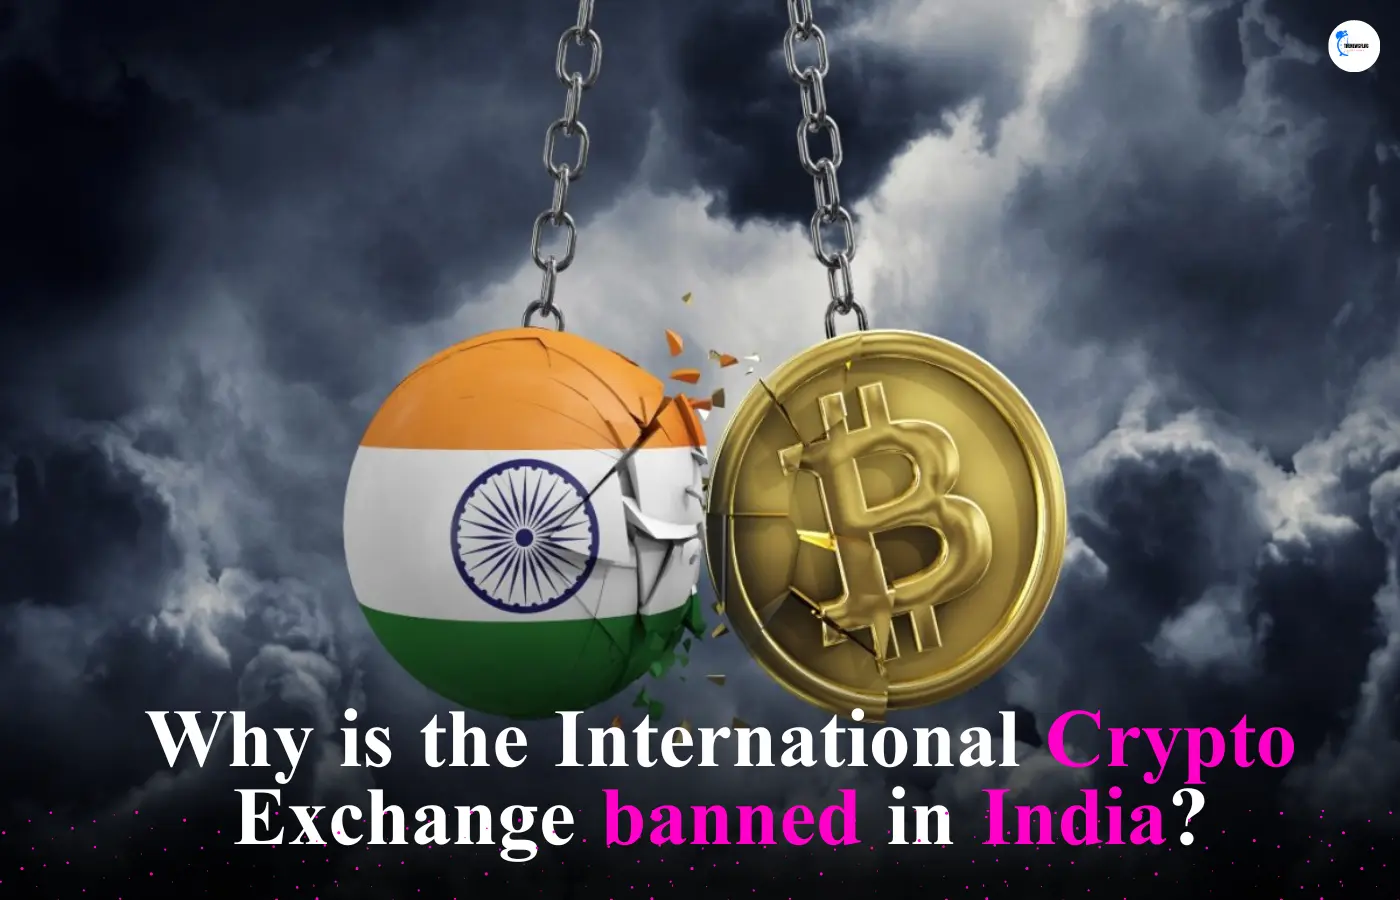 Why International Crypto Exchange Ban in India?